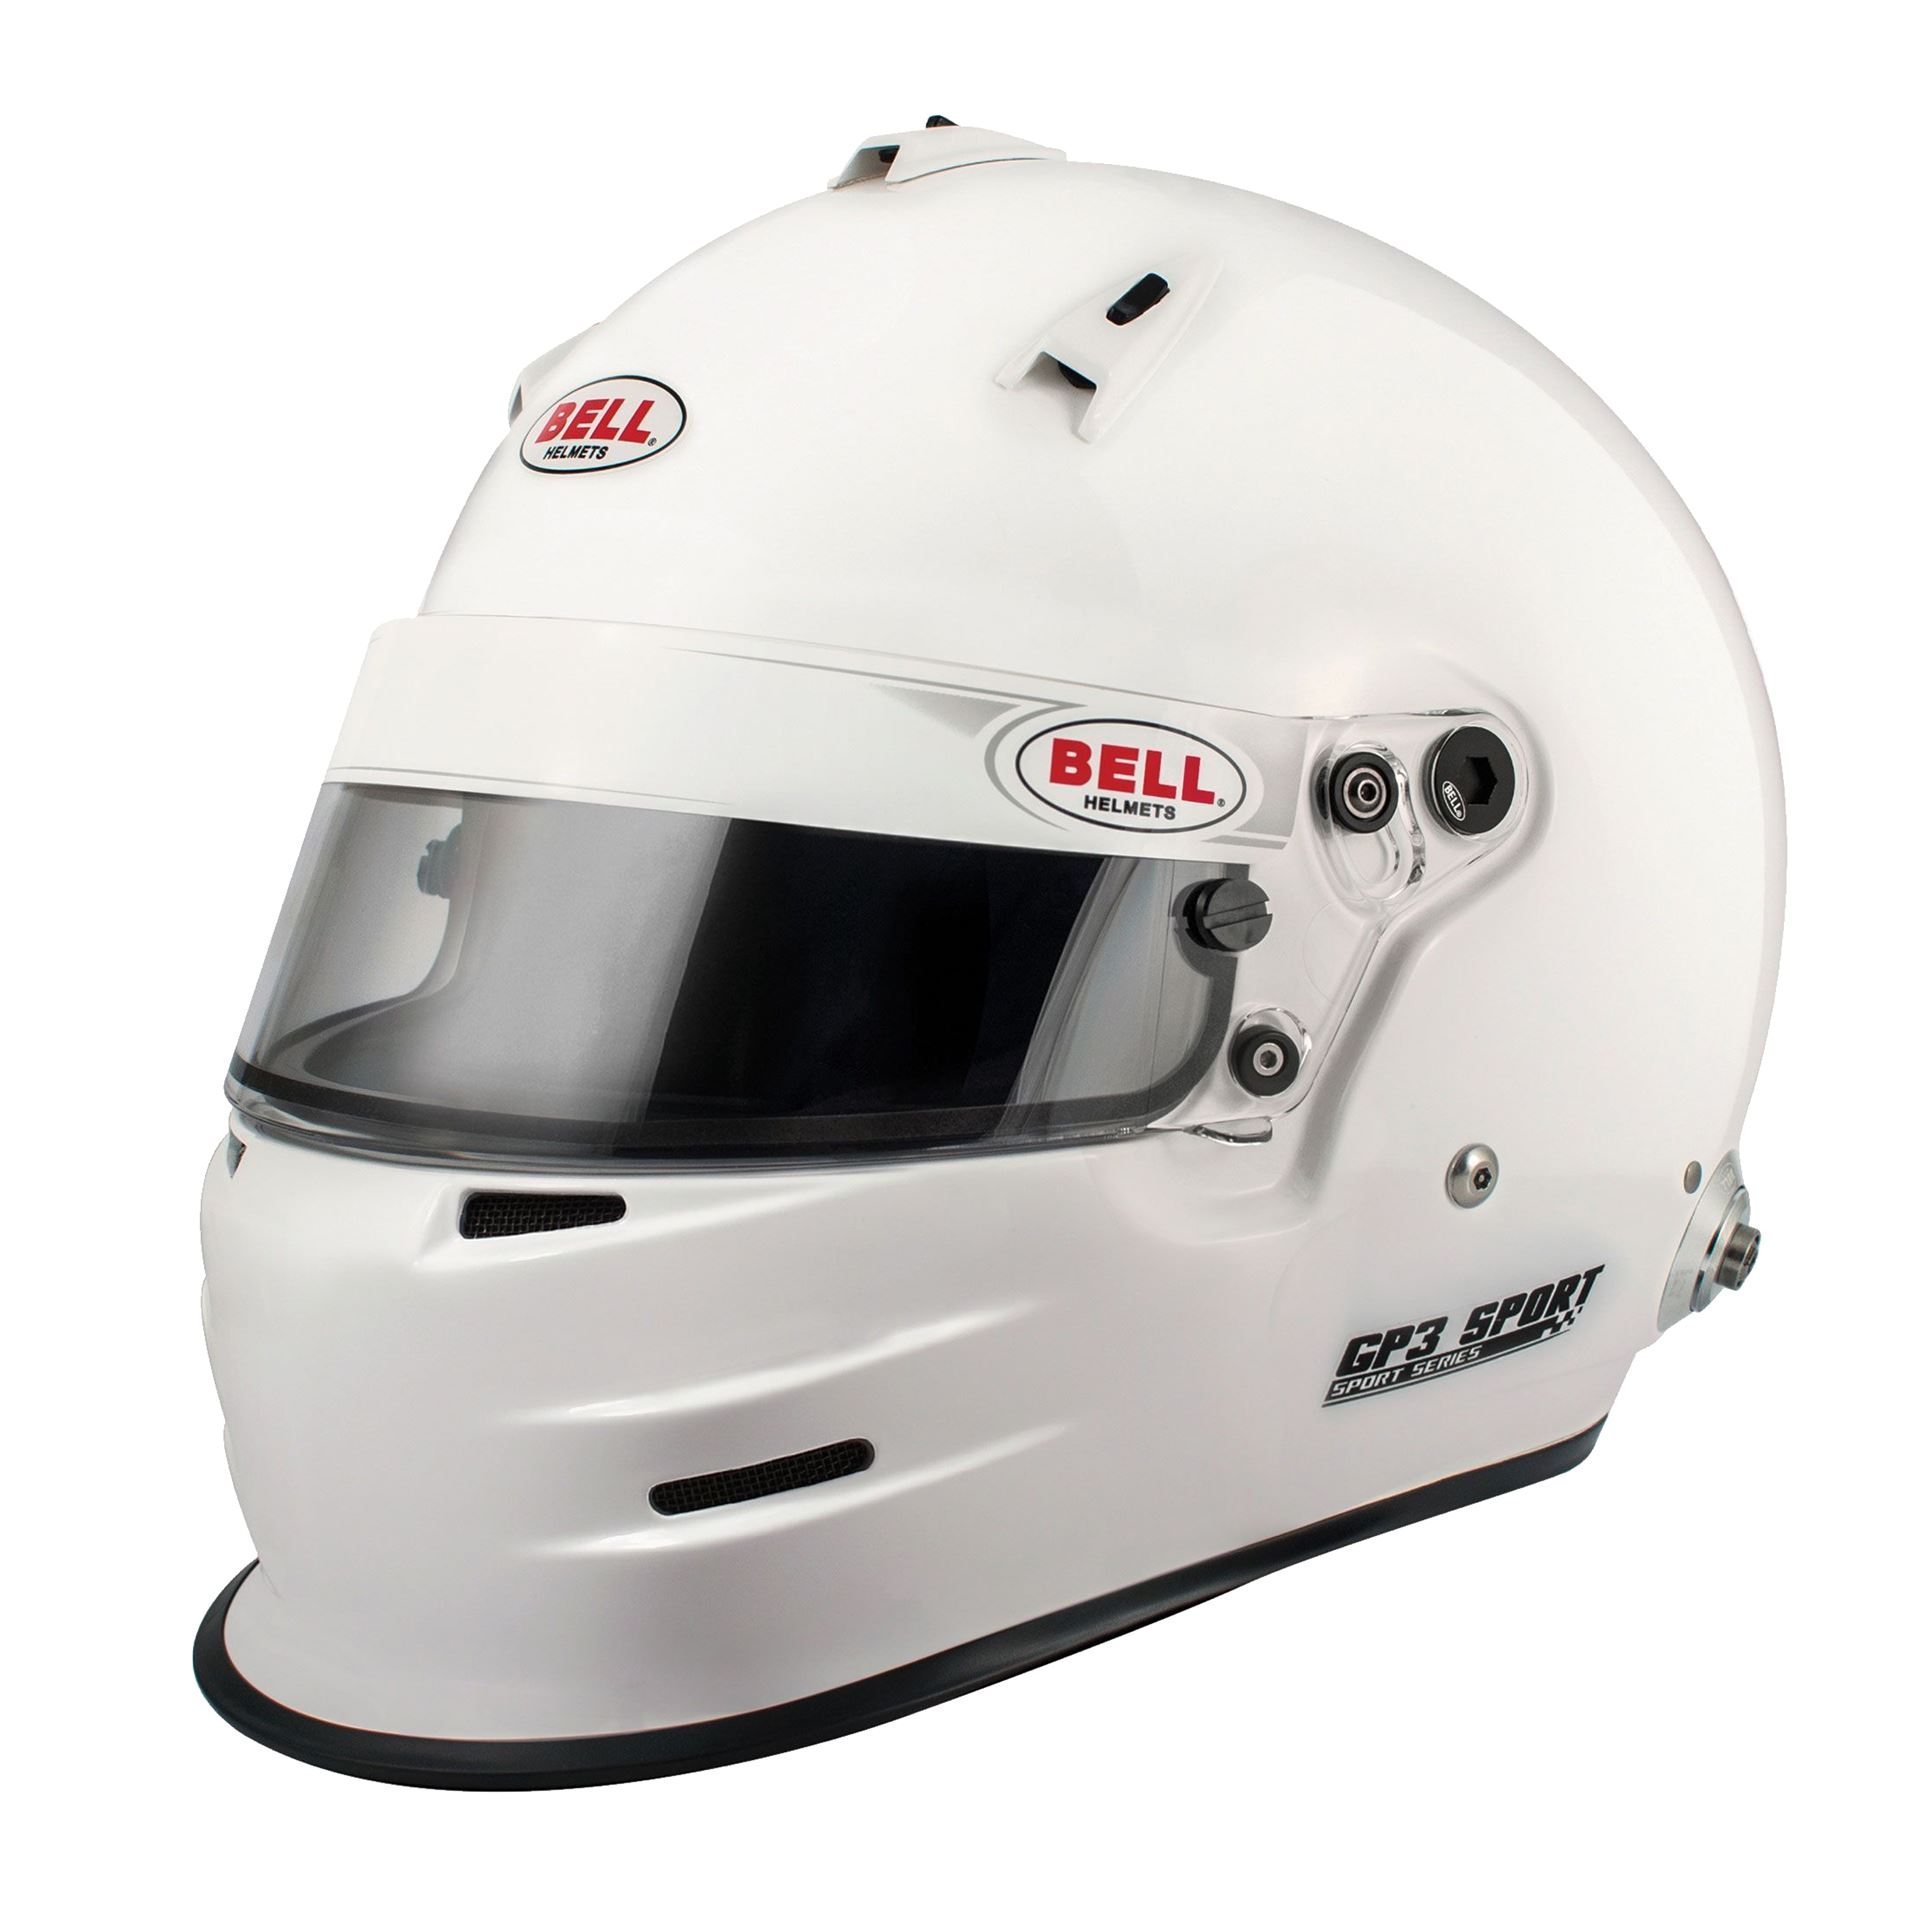 BELL 1417024 Racing helmet full-face GP3 SPORT, HANS, FIA8859, white, size XLG (61-62) (Фото-1)